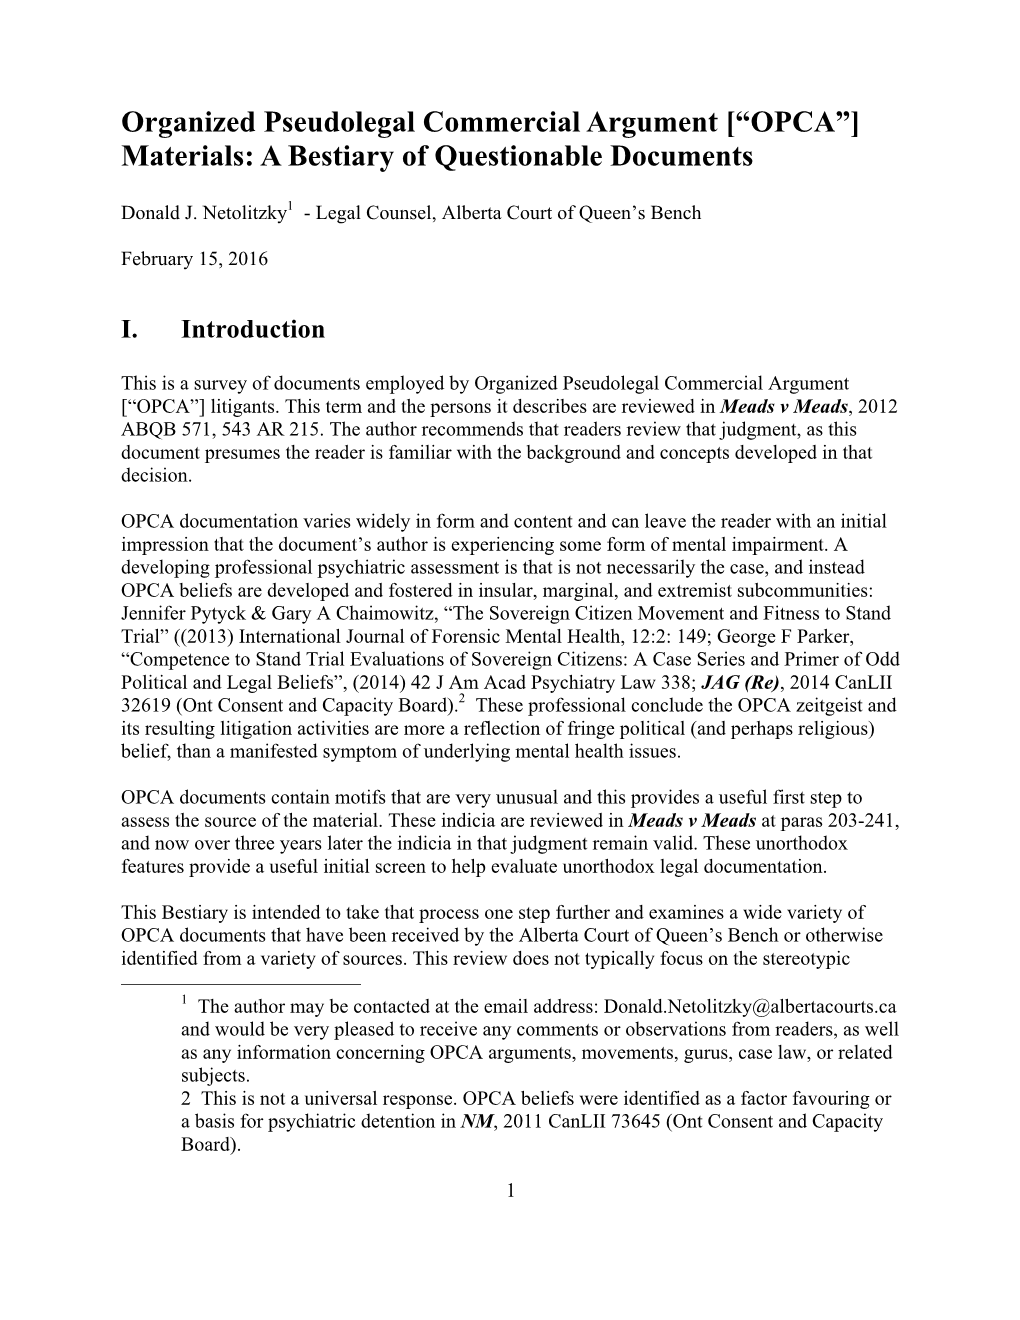 Organized Pseudolegal Commercial Argument [“OPCA”] Materials: a Bestiary of Questionable Documents